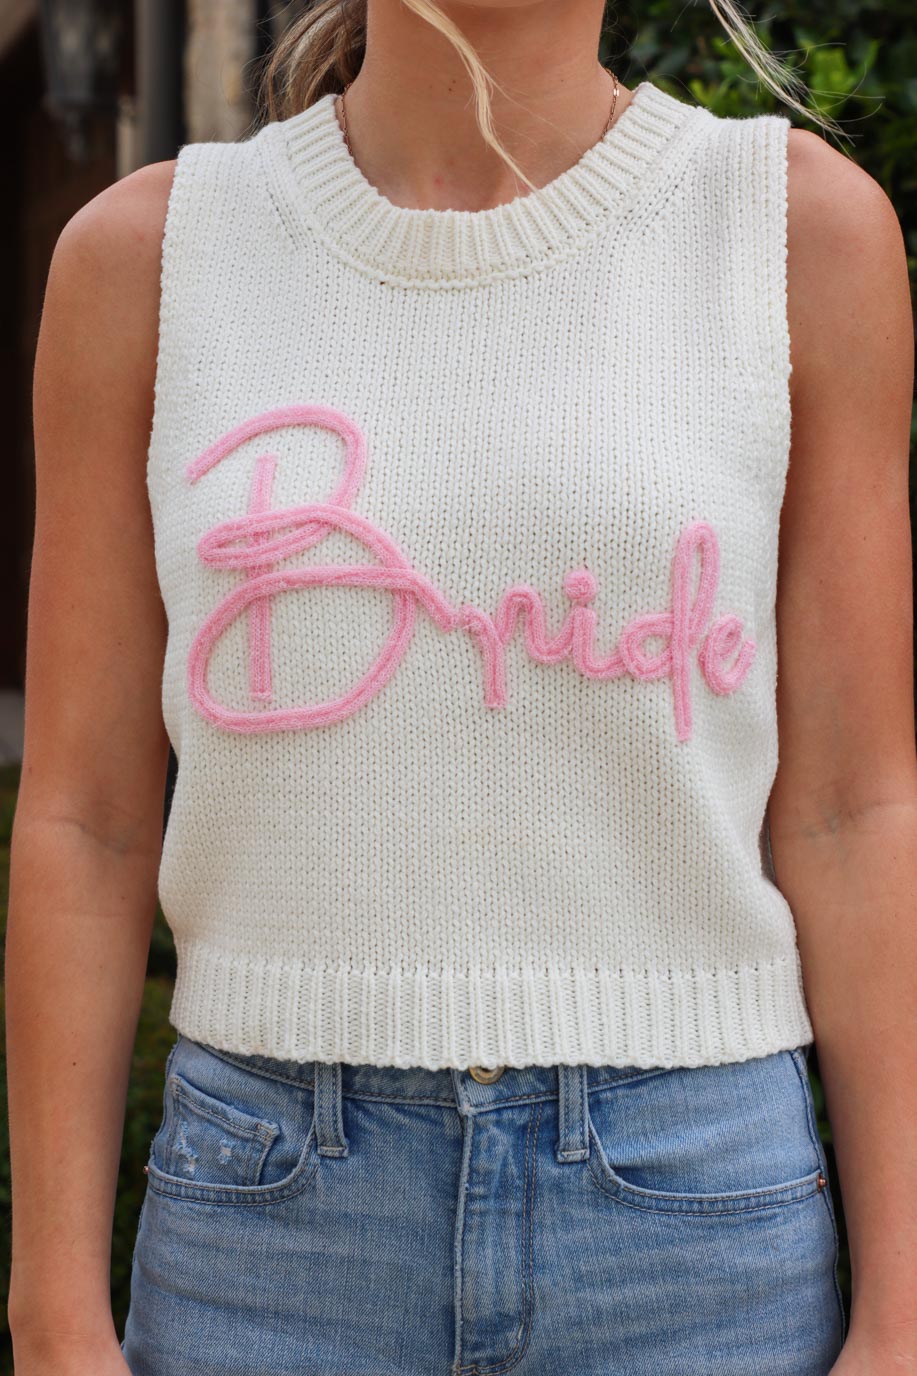 girl wearing white knit tank top with pink "bride" lettering